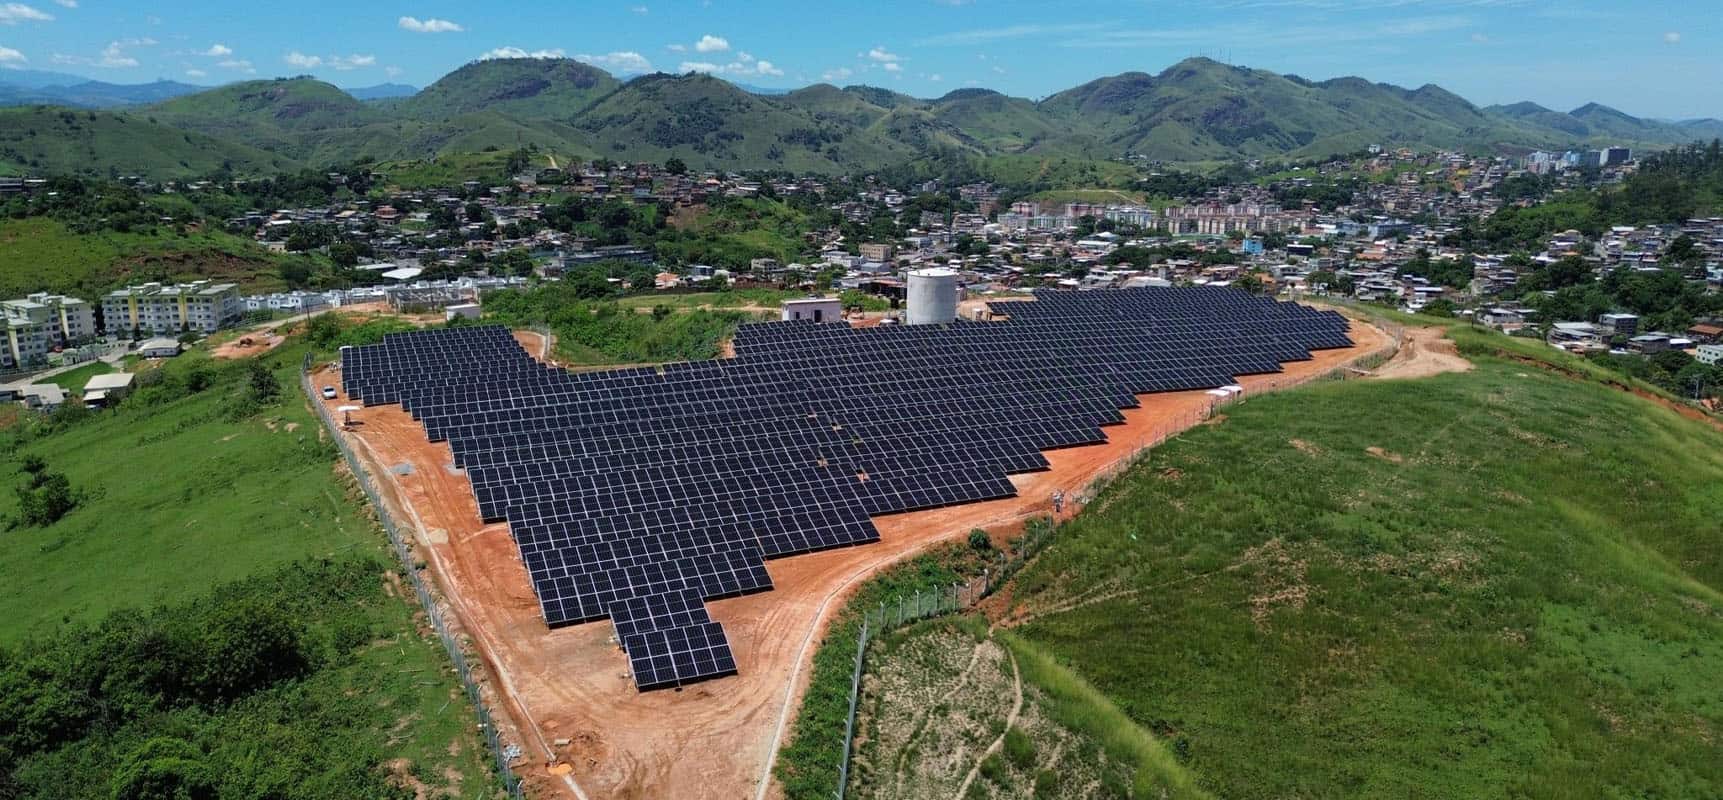 The largest state-owned overseas energy storage project breaks ground